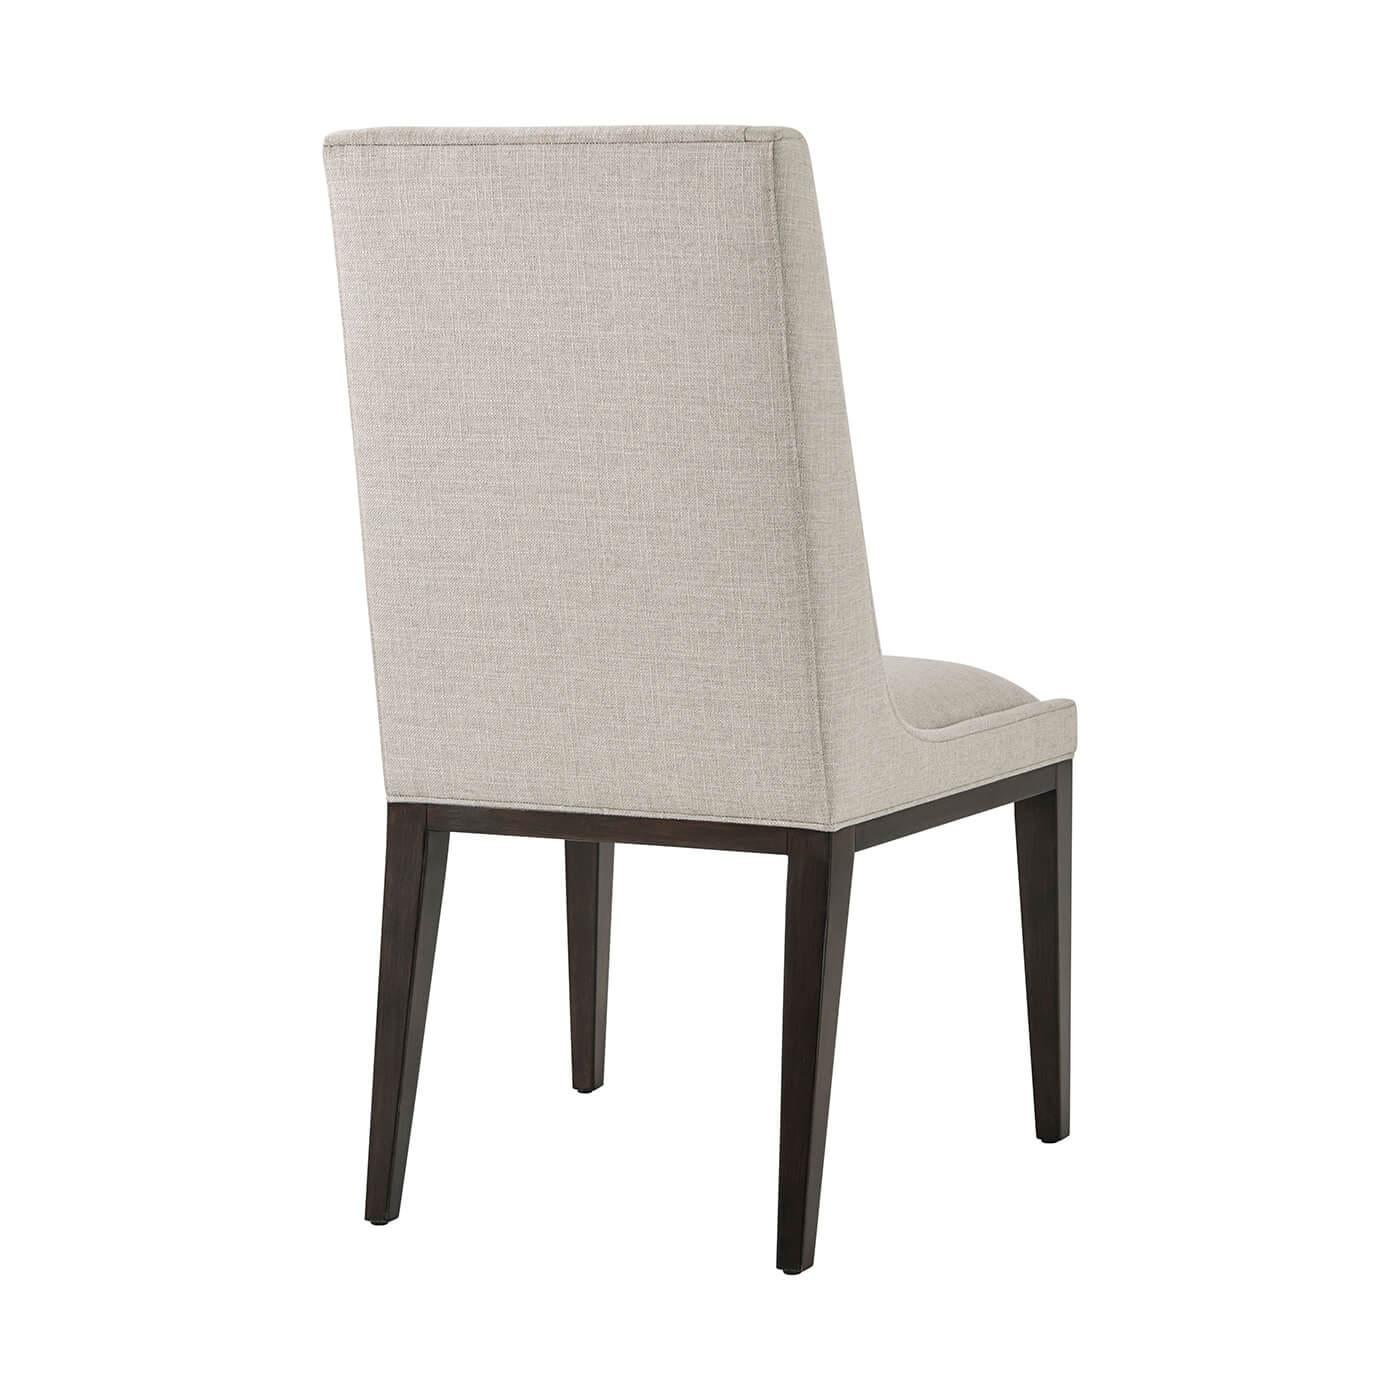 mid century upholstered dining chair